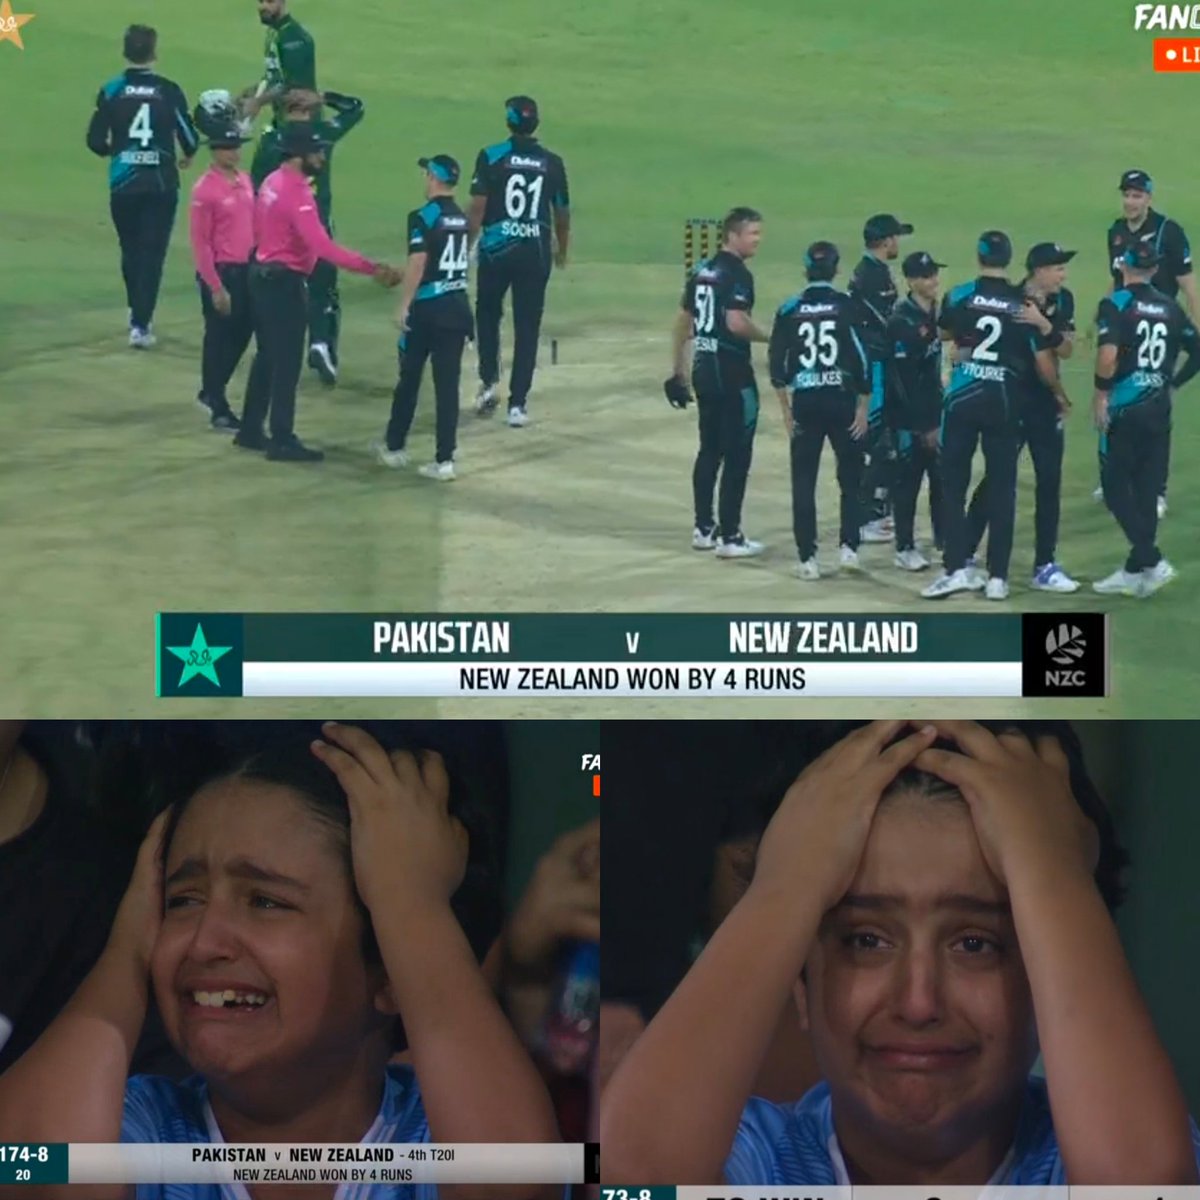 Whenever you feel unhappy 😔 dipress,sad, 😢 and want some happiness in your life just look at the performance of Pakistan team 😂😂🤣🤣

#PAKvsNZ #PKMKBFOREVER